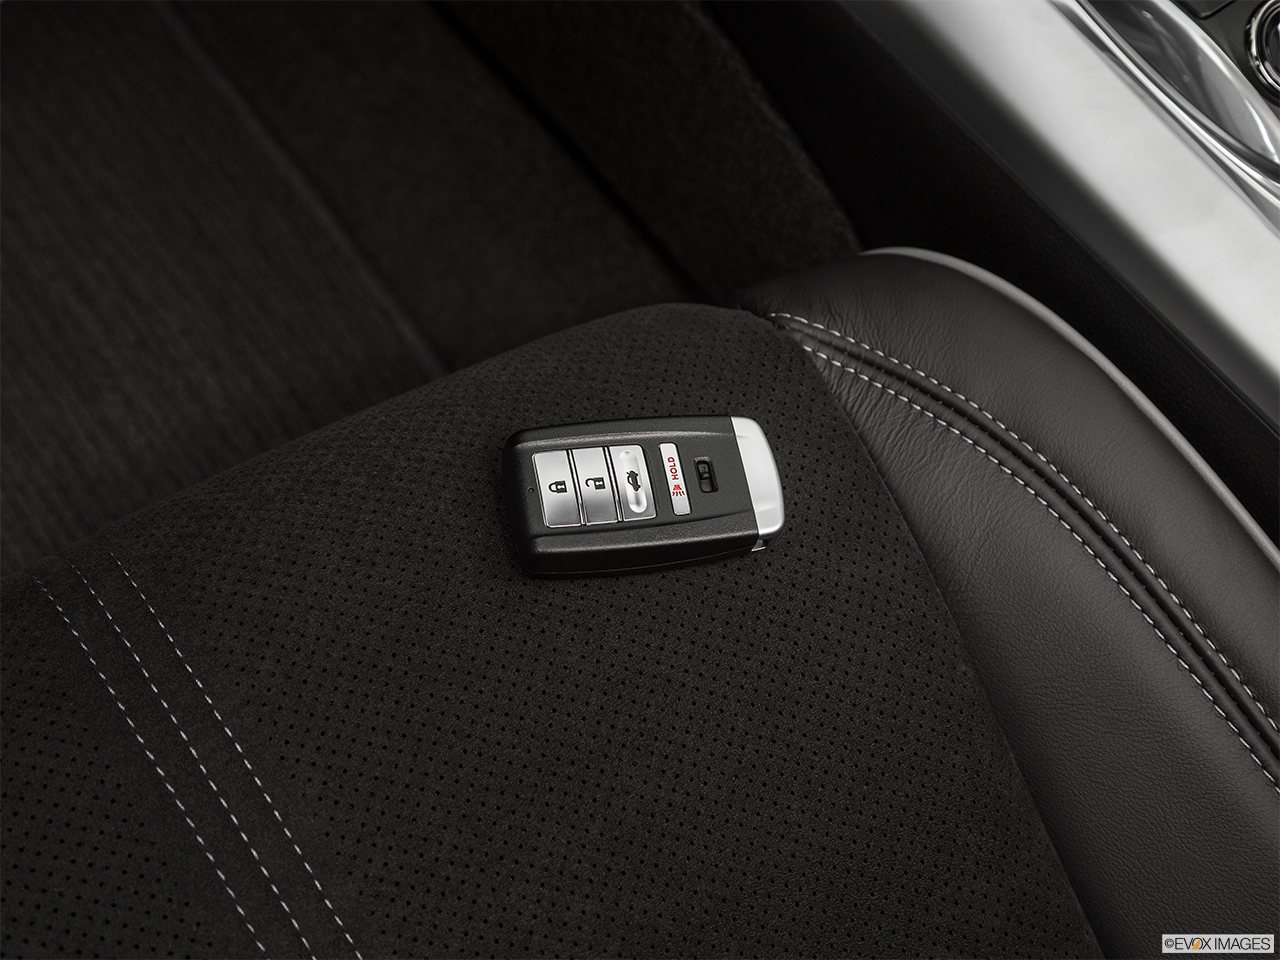 2019 Acura TLX 3.5L Key fob on driver's seat. 